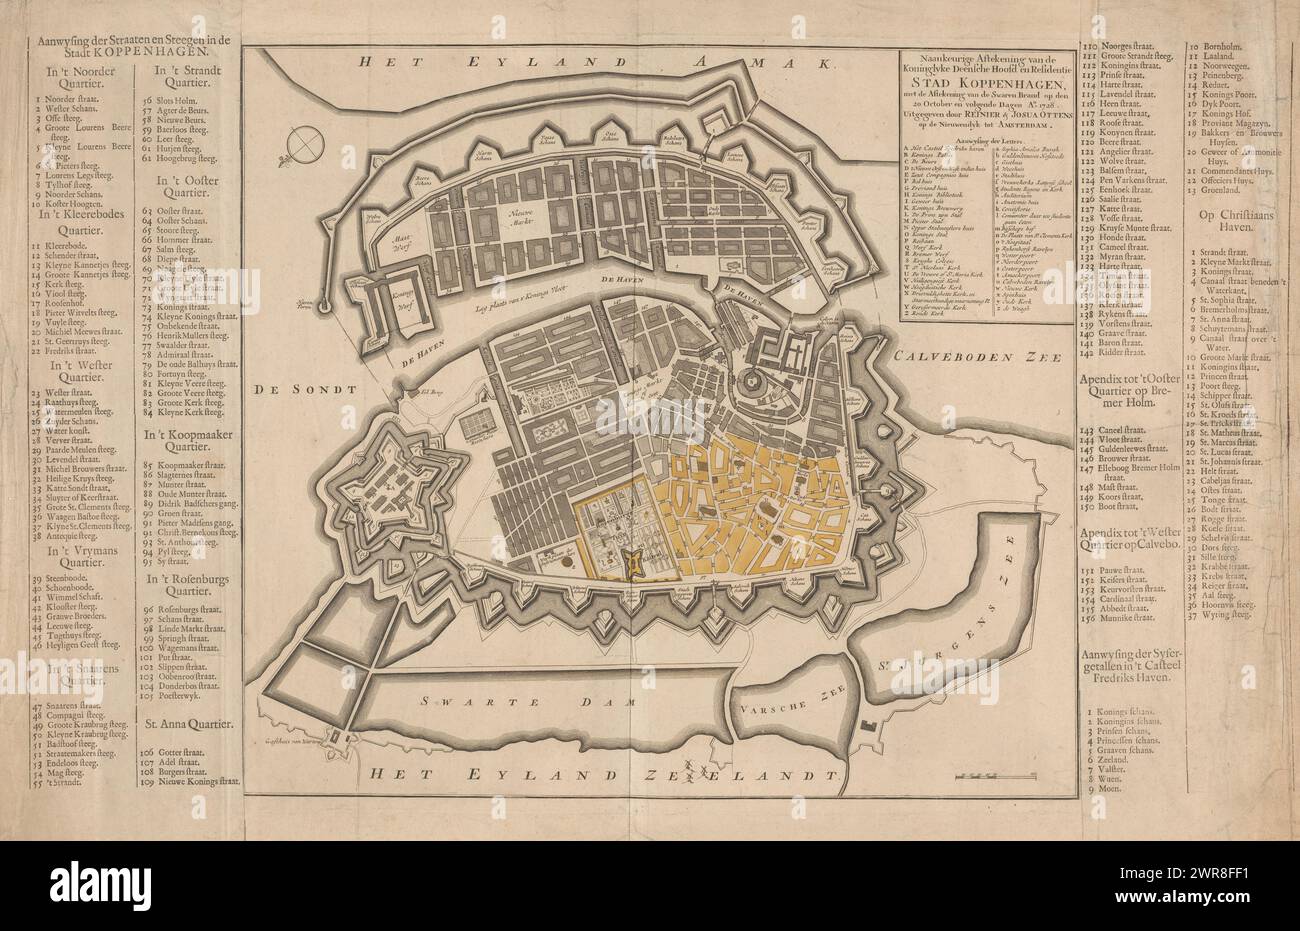 Map of Copenhagen, Accurate drawing of the royal Danish capital and residence of the city of Copenhagen (...) (title on object), Map of Copenhagen showing the damage from the fire of October 1728. The part of the city colored yellow (bottom right) was reduced to ashes during the fire. On either side of the map there is a legend showing the streets of the city., print maker: anonymous, publisher: Reinier Ottens (I) & Josua, Amsterdam, after c. 1728, paper, etching, engraving, letterpress printing, height 563 mm × width 843 mm, print Stock Photo